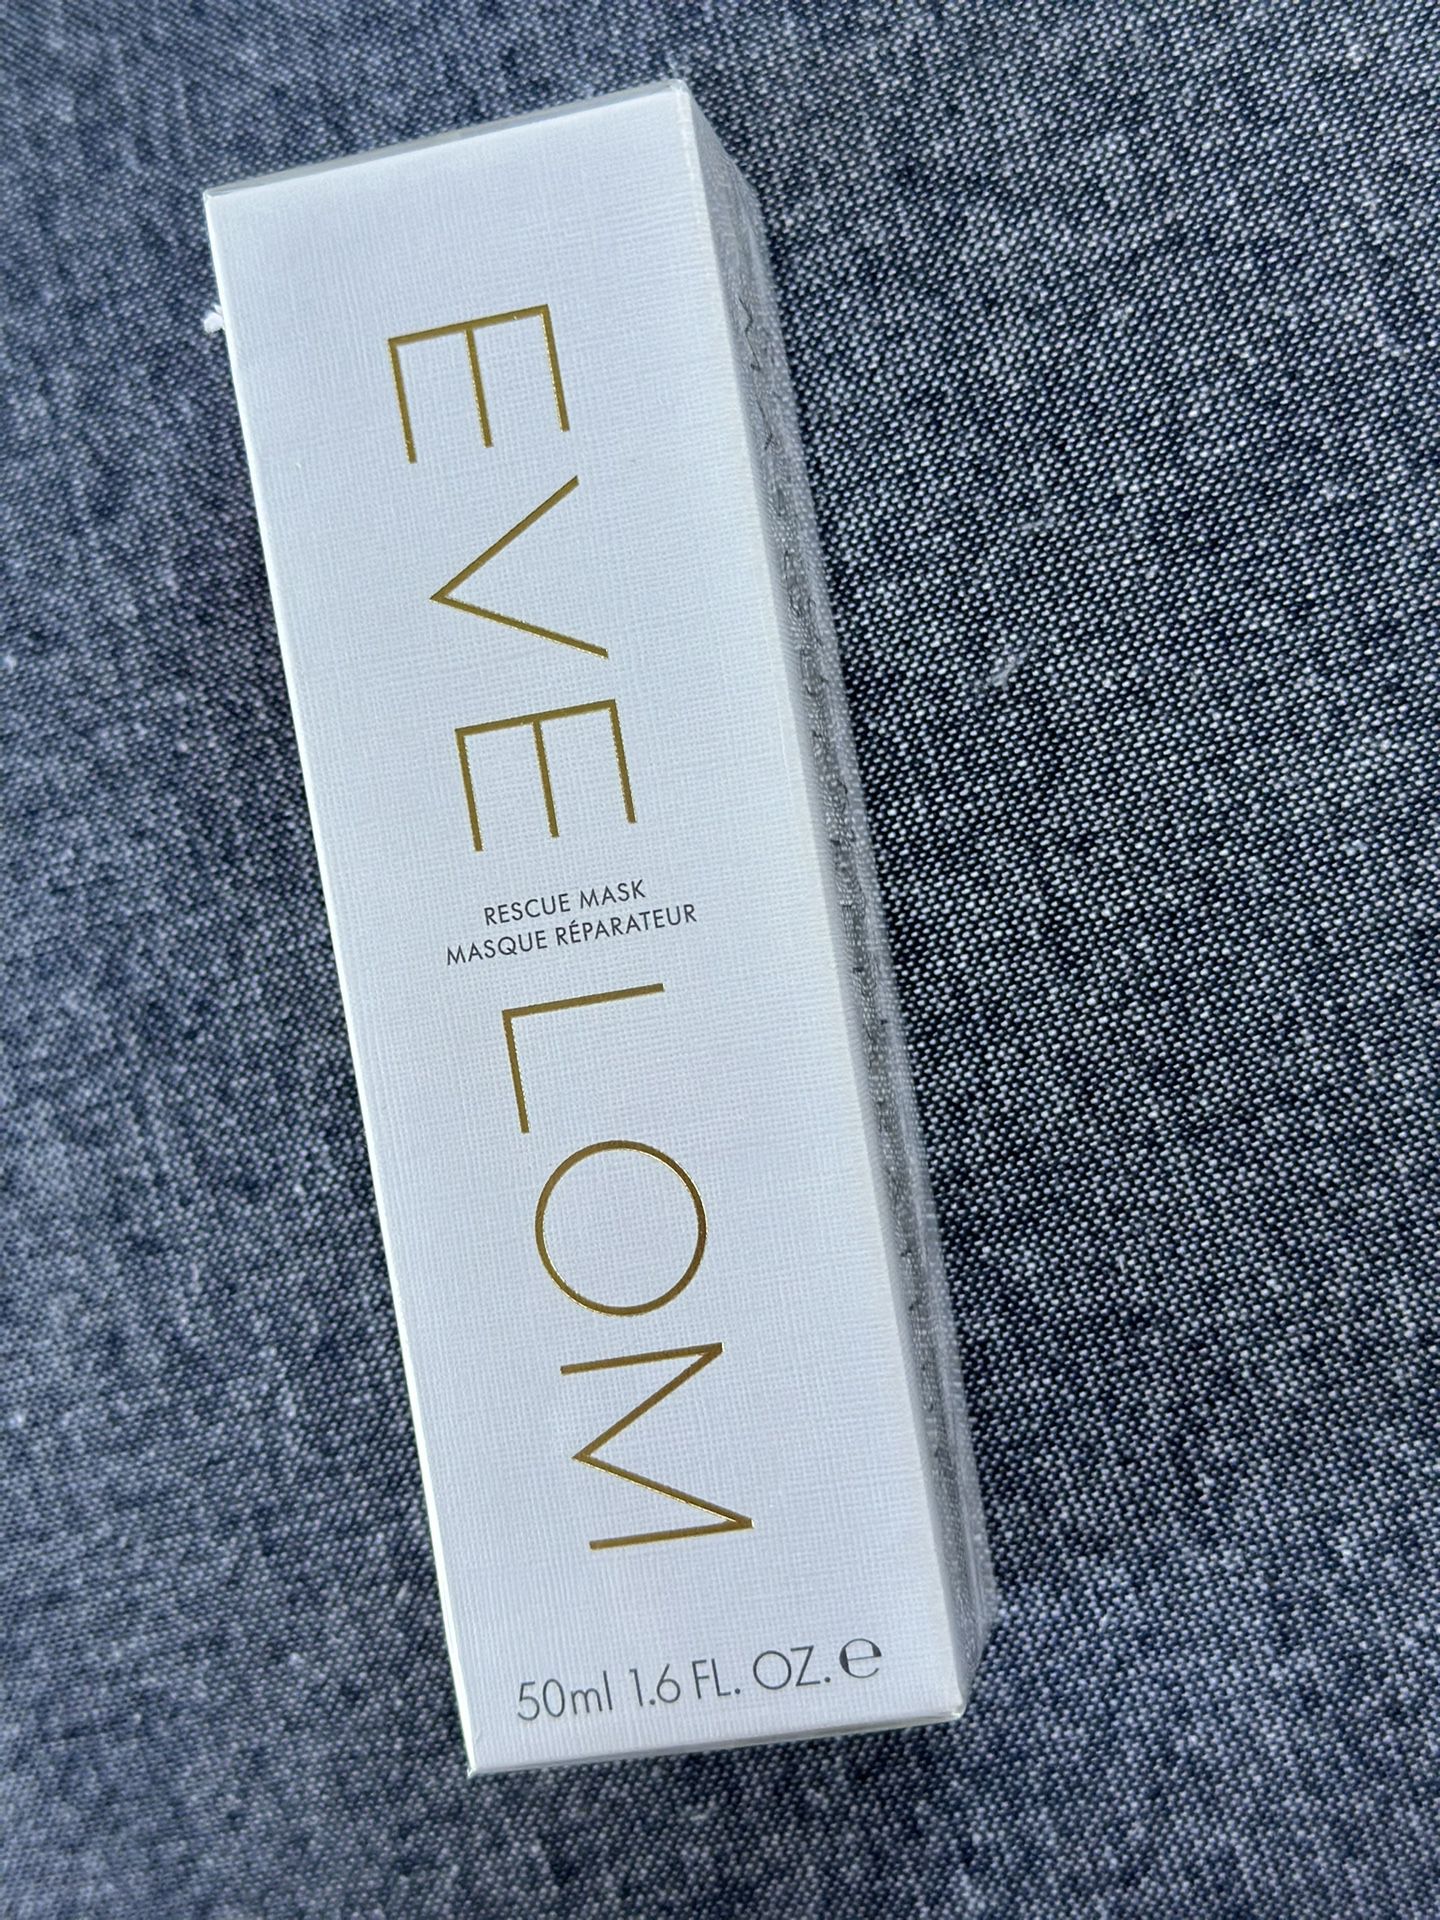 EvELOM , Rescue/face Mask , 